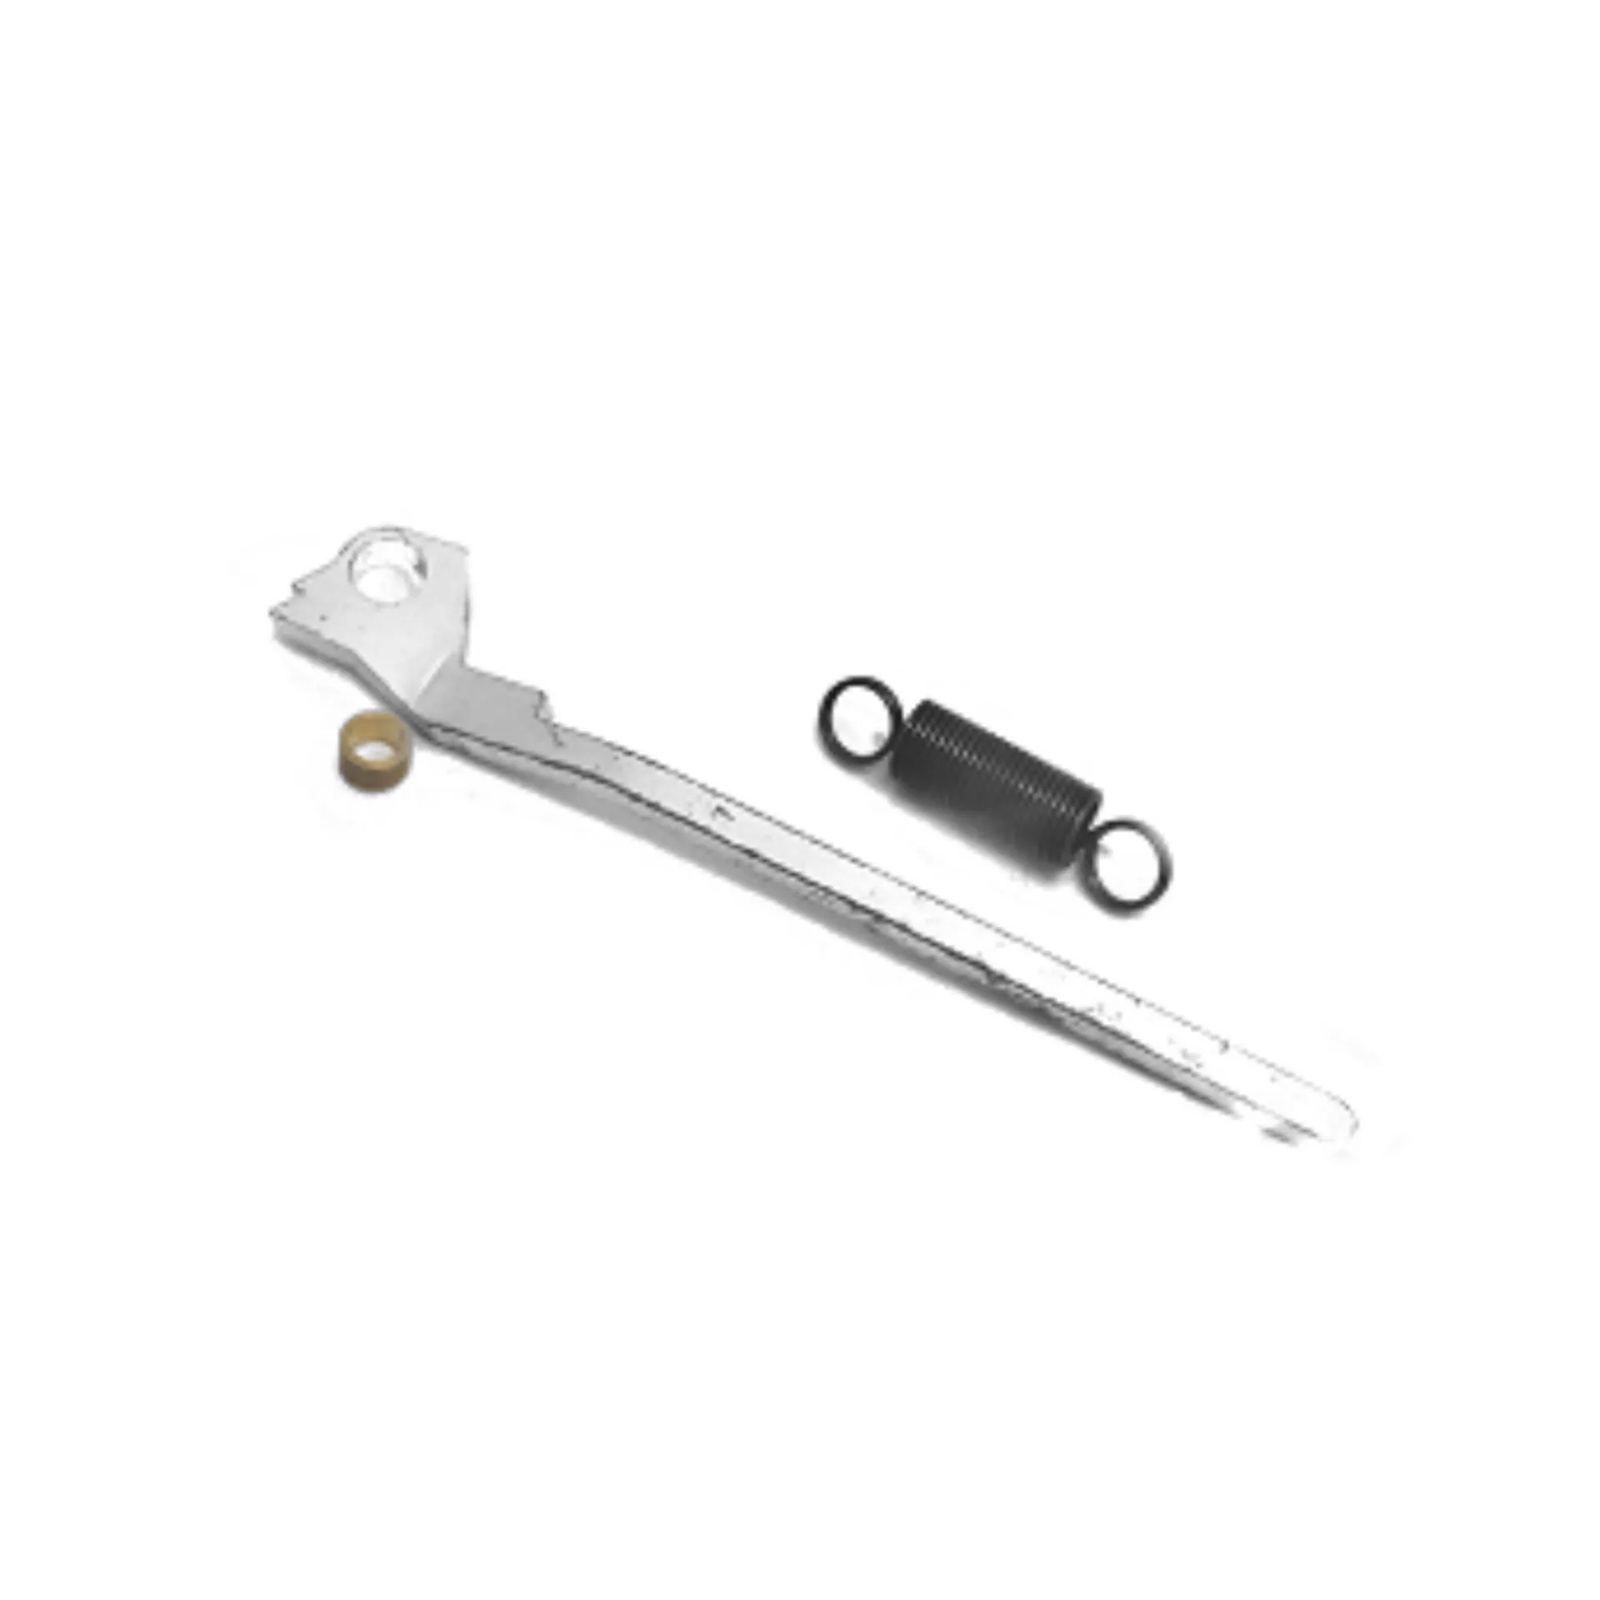 Lever for tire pliers item no. 1376